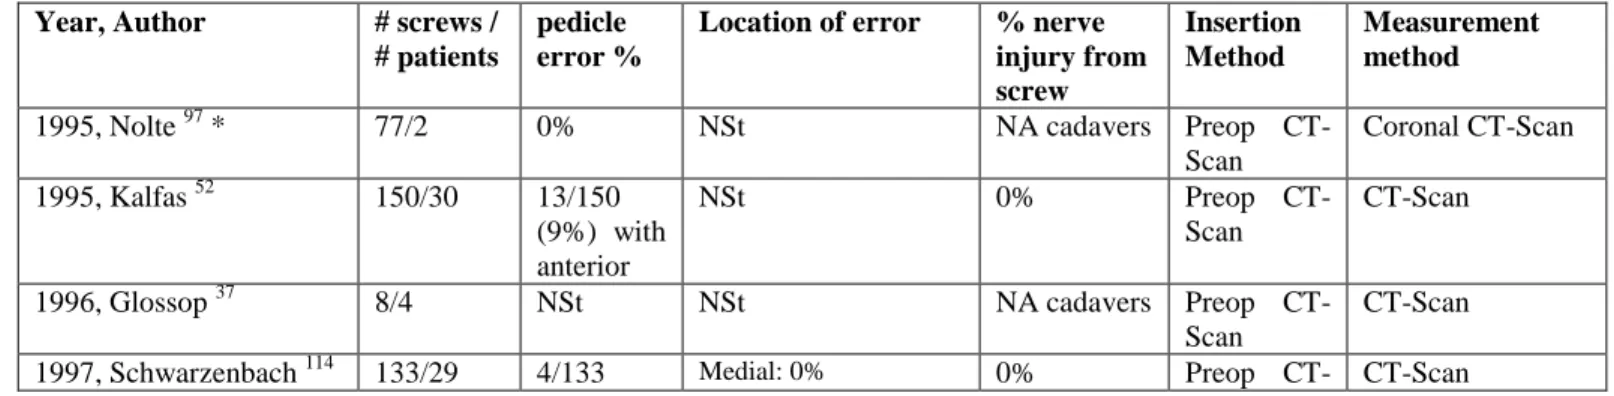 Table 3. 4  Literature review for lumbar pedicle error with pre-operative CT-Scan technique  Year, Author  # screws / 